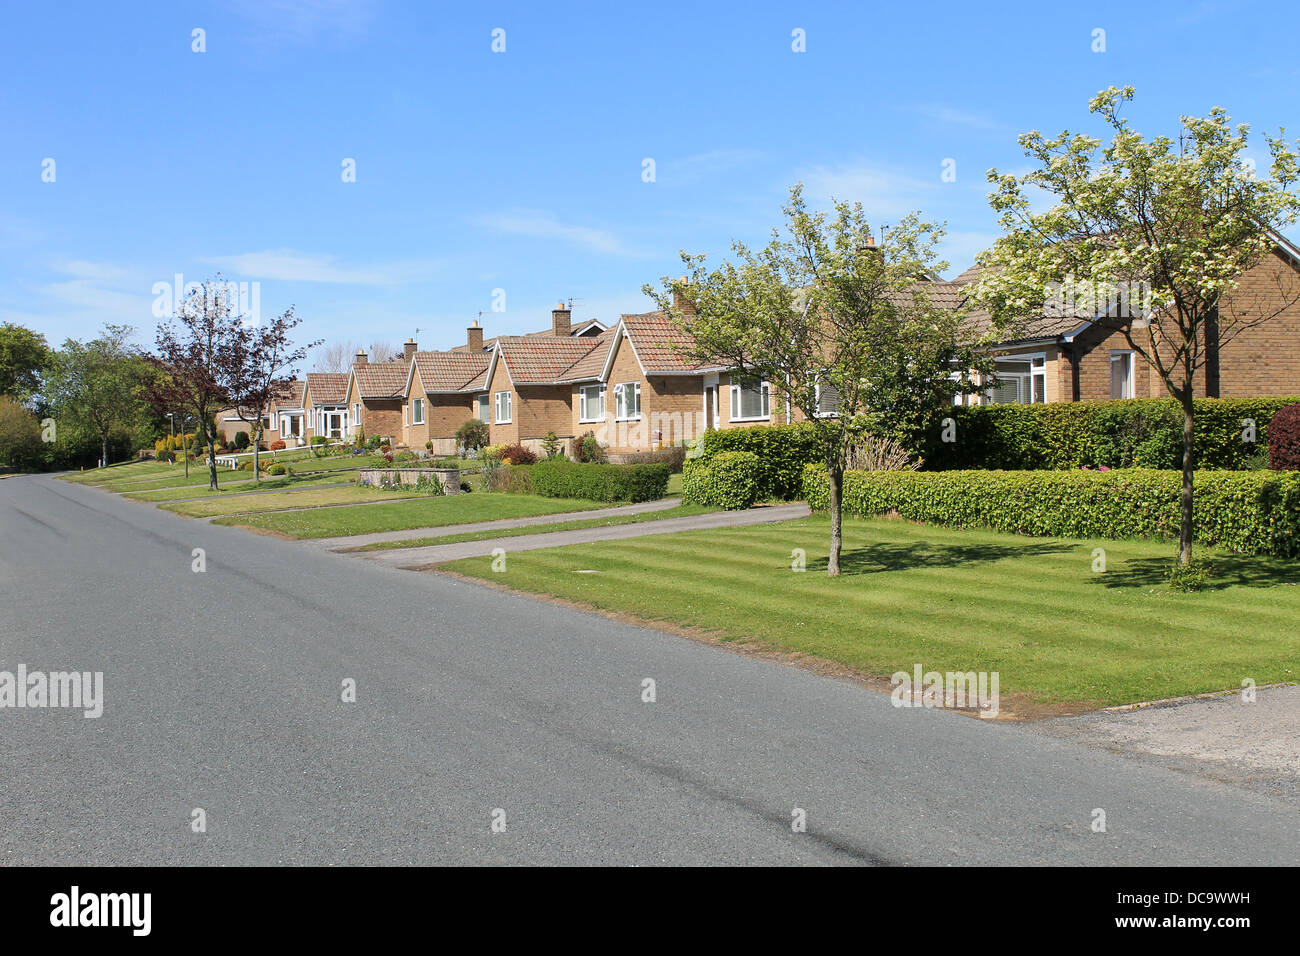 Row of bungalows in village with blue sky background. Stock Photo